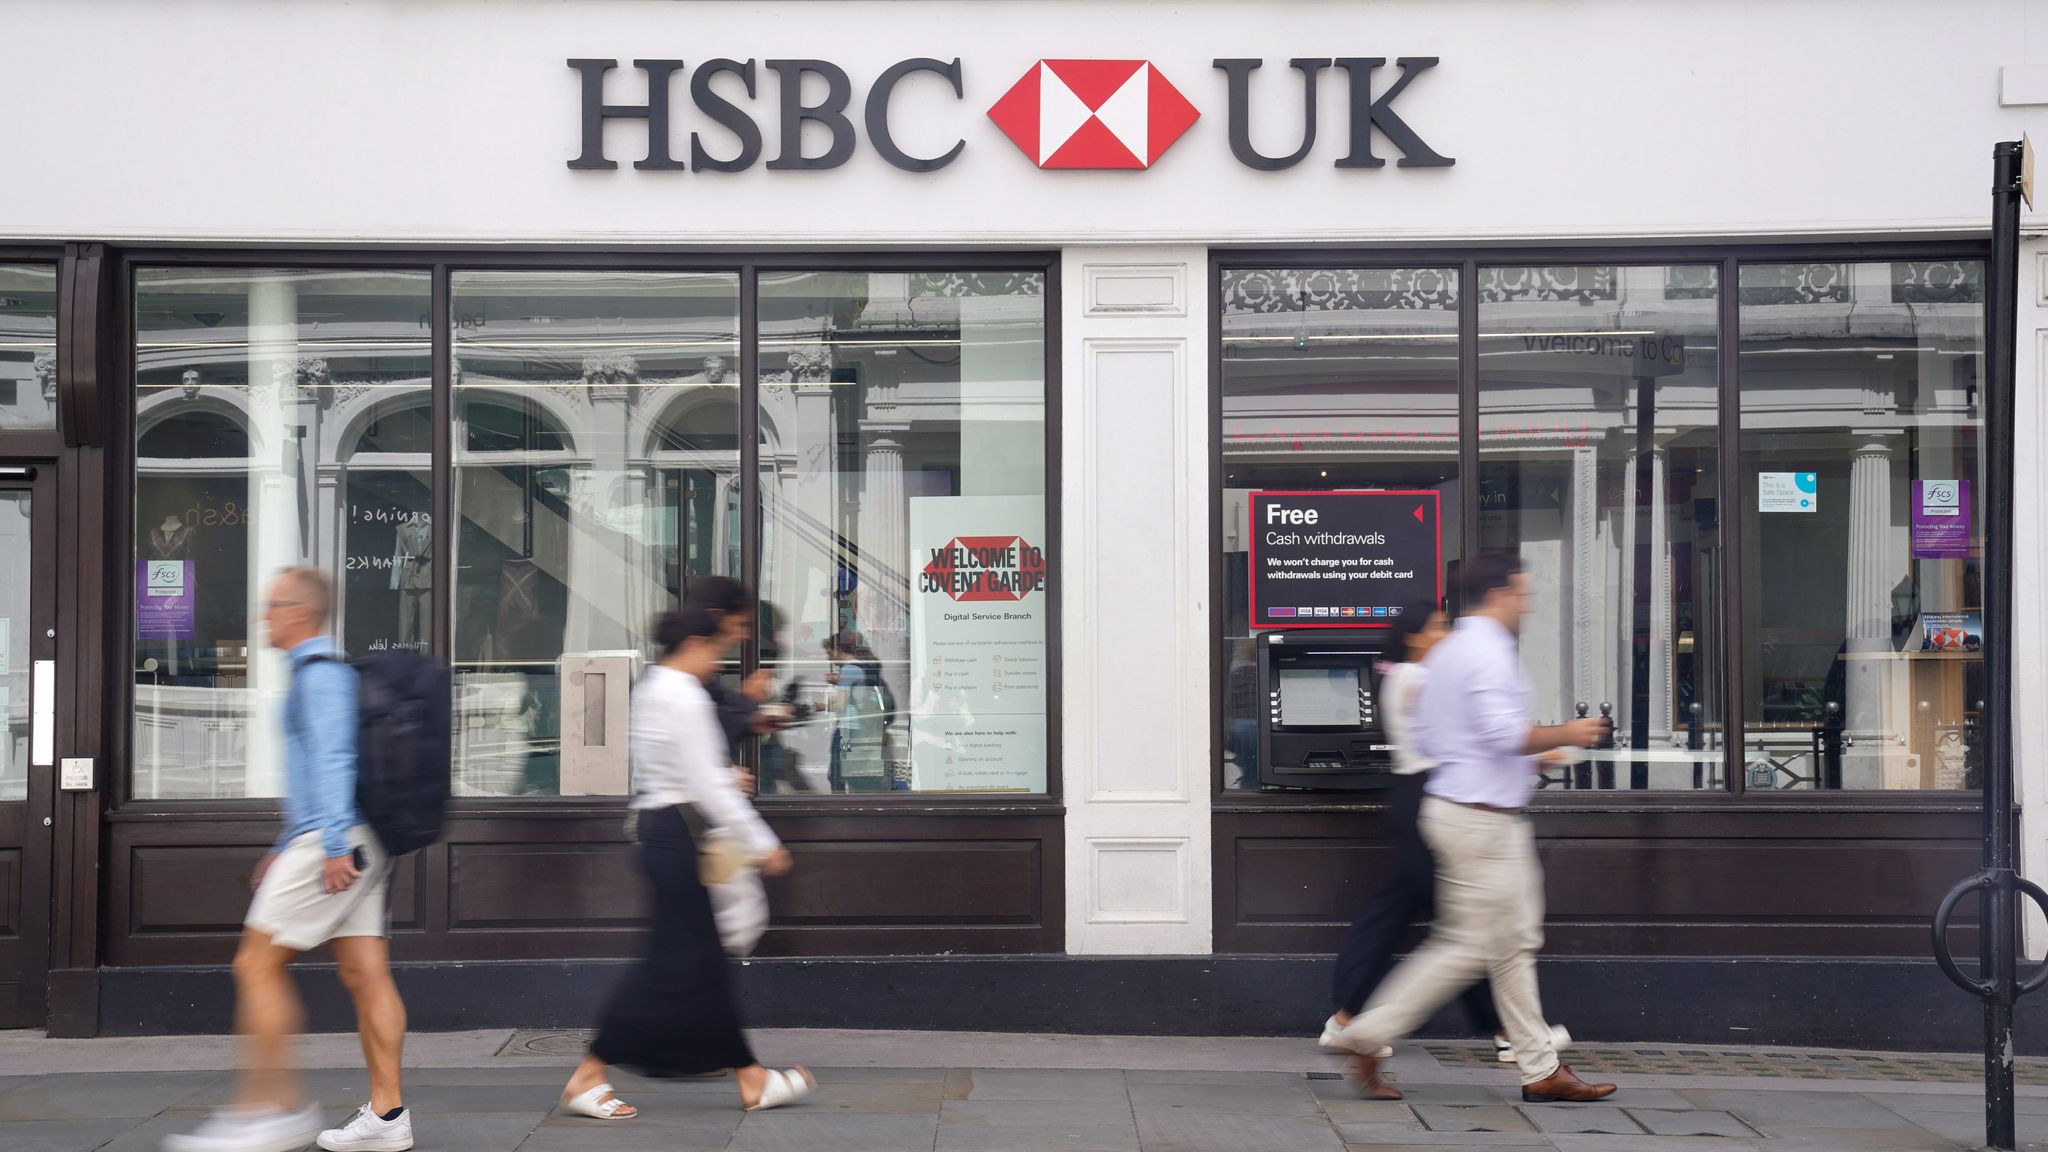 HSBC hit with £57m fine over deposit protection